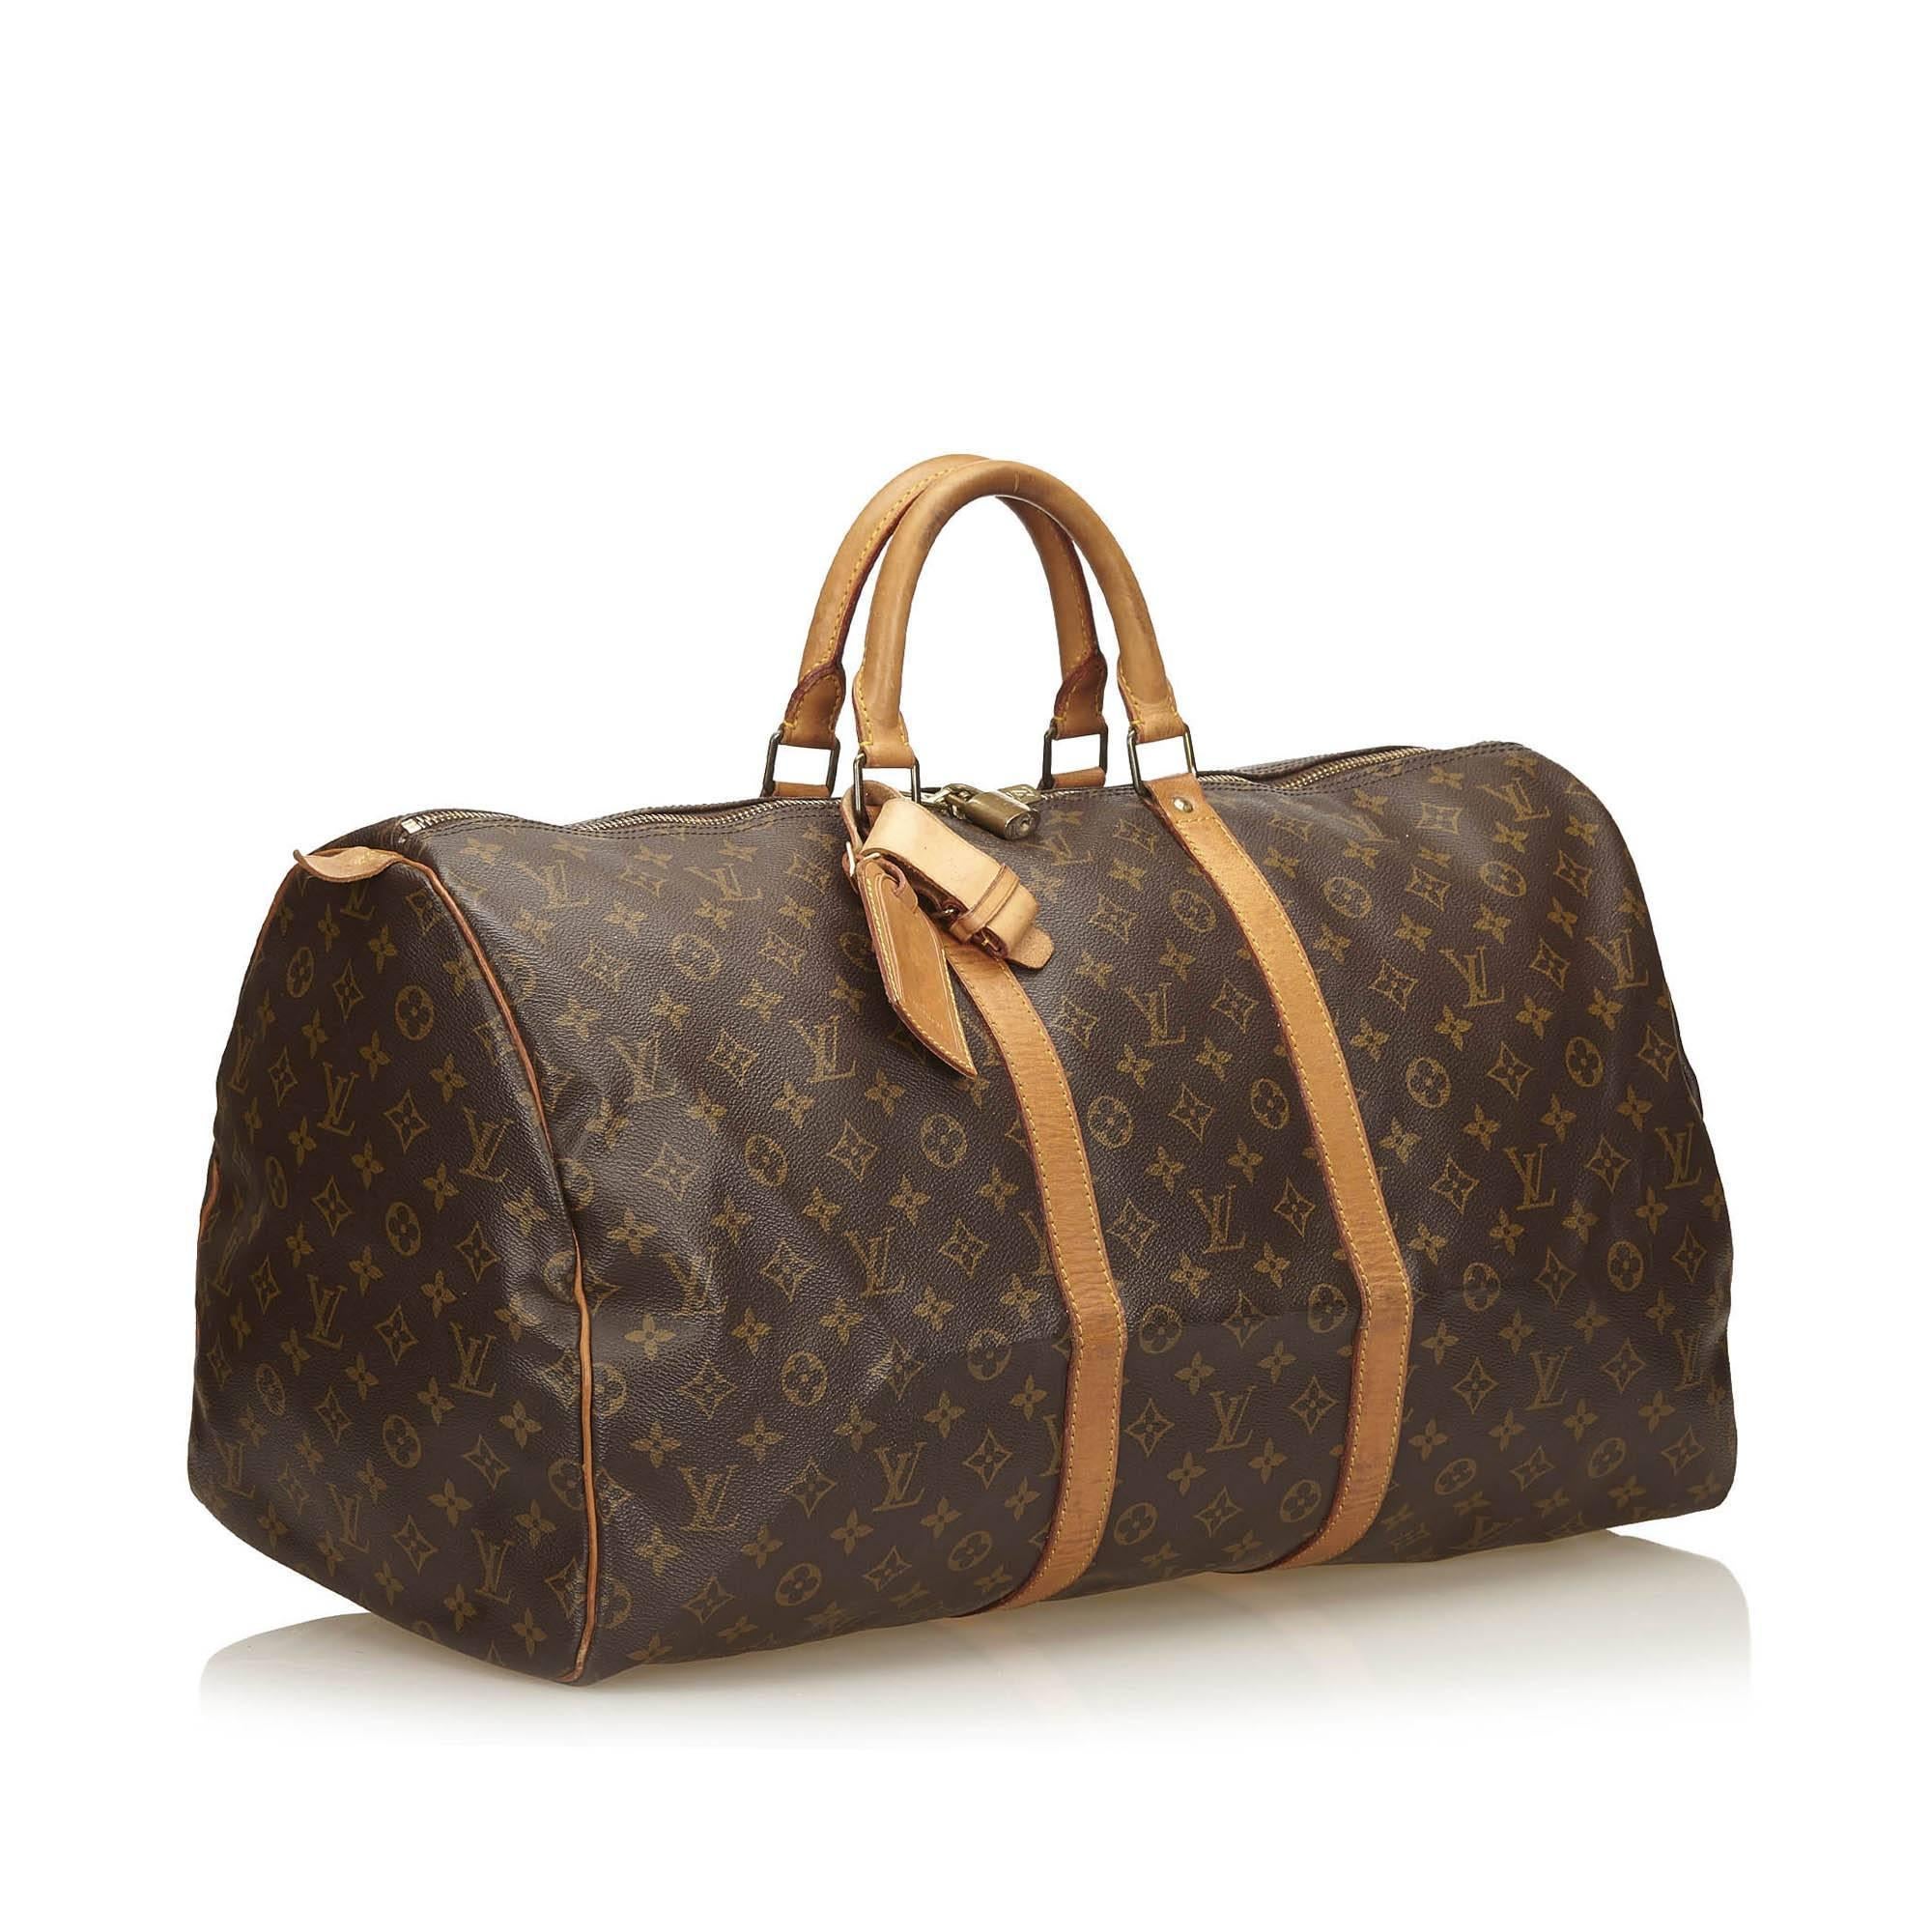 The Keepall 55 features a monogram canvas body, rolled leather handles and a top zip closure.